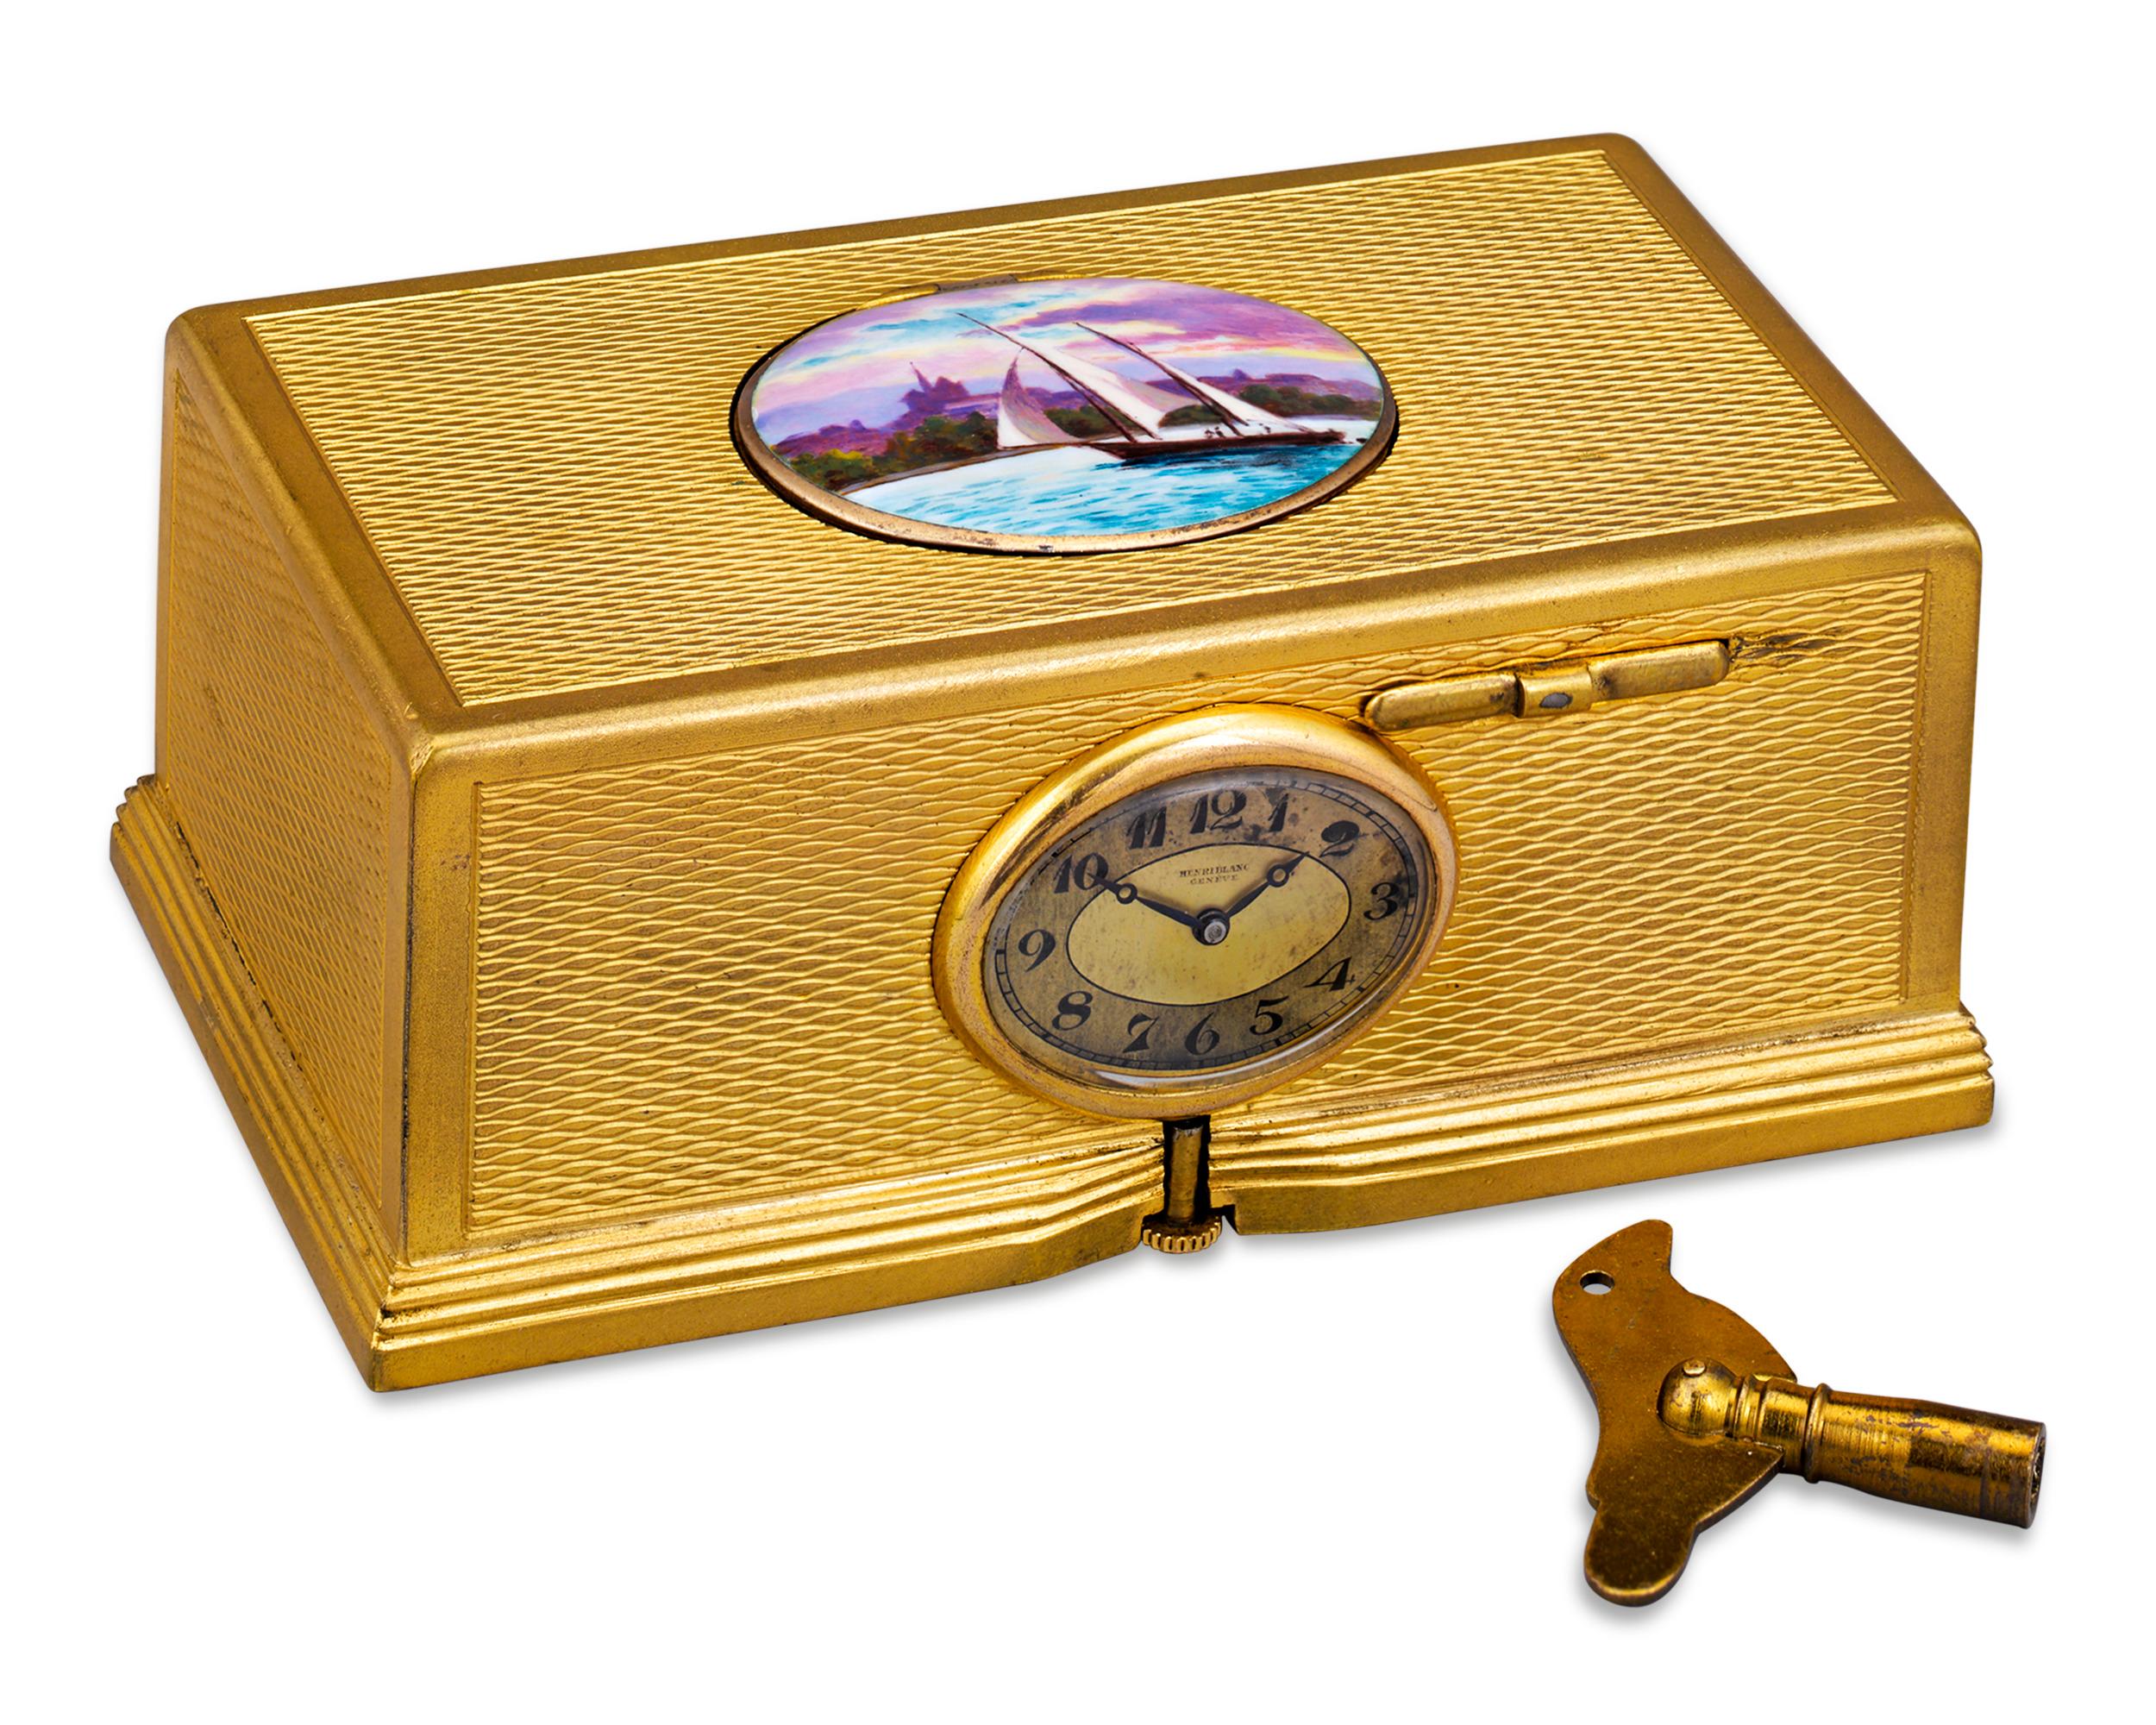 Combining a diminutive clock and a charming automaton, this Swiss bird box is a mechanical work of art. Enveloped in an intricately engraved gold-plated case, its complex mechanism springs to life with the simple press of a button. When activated,